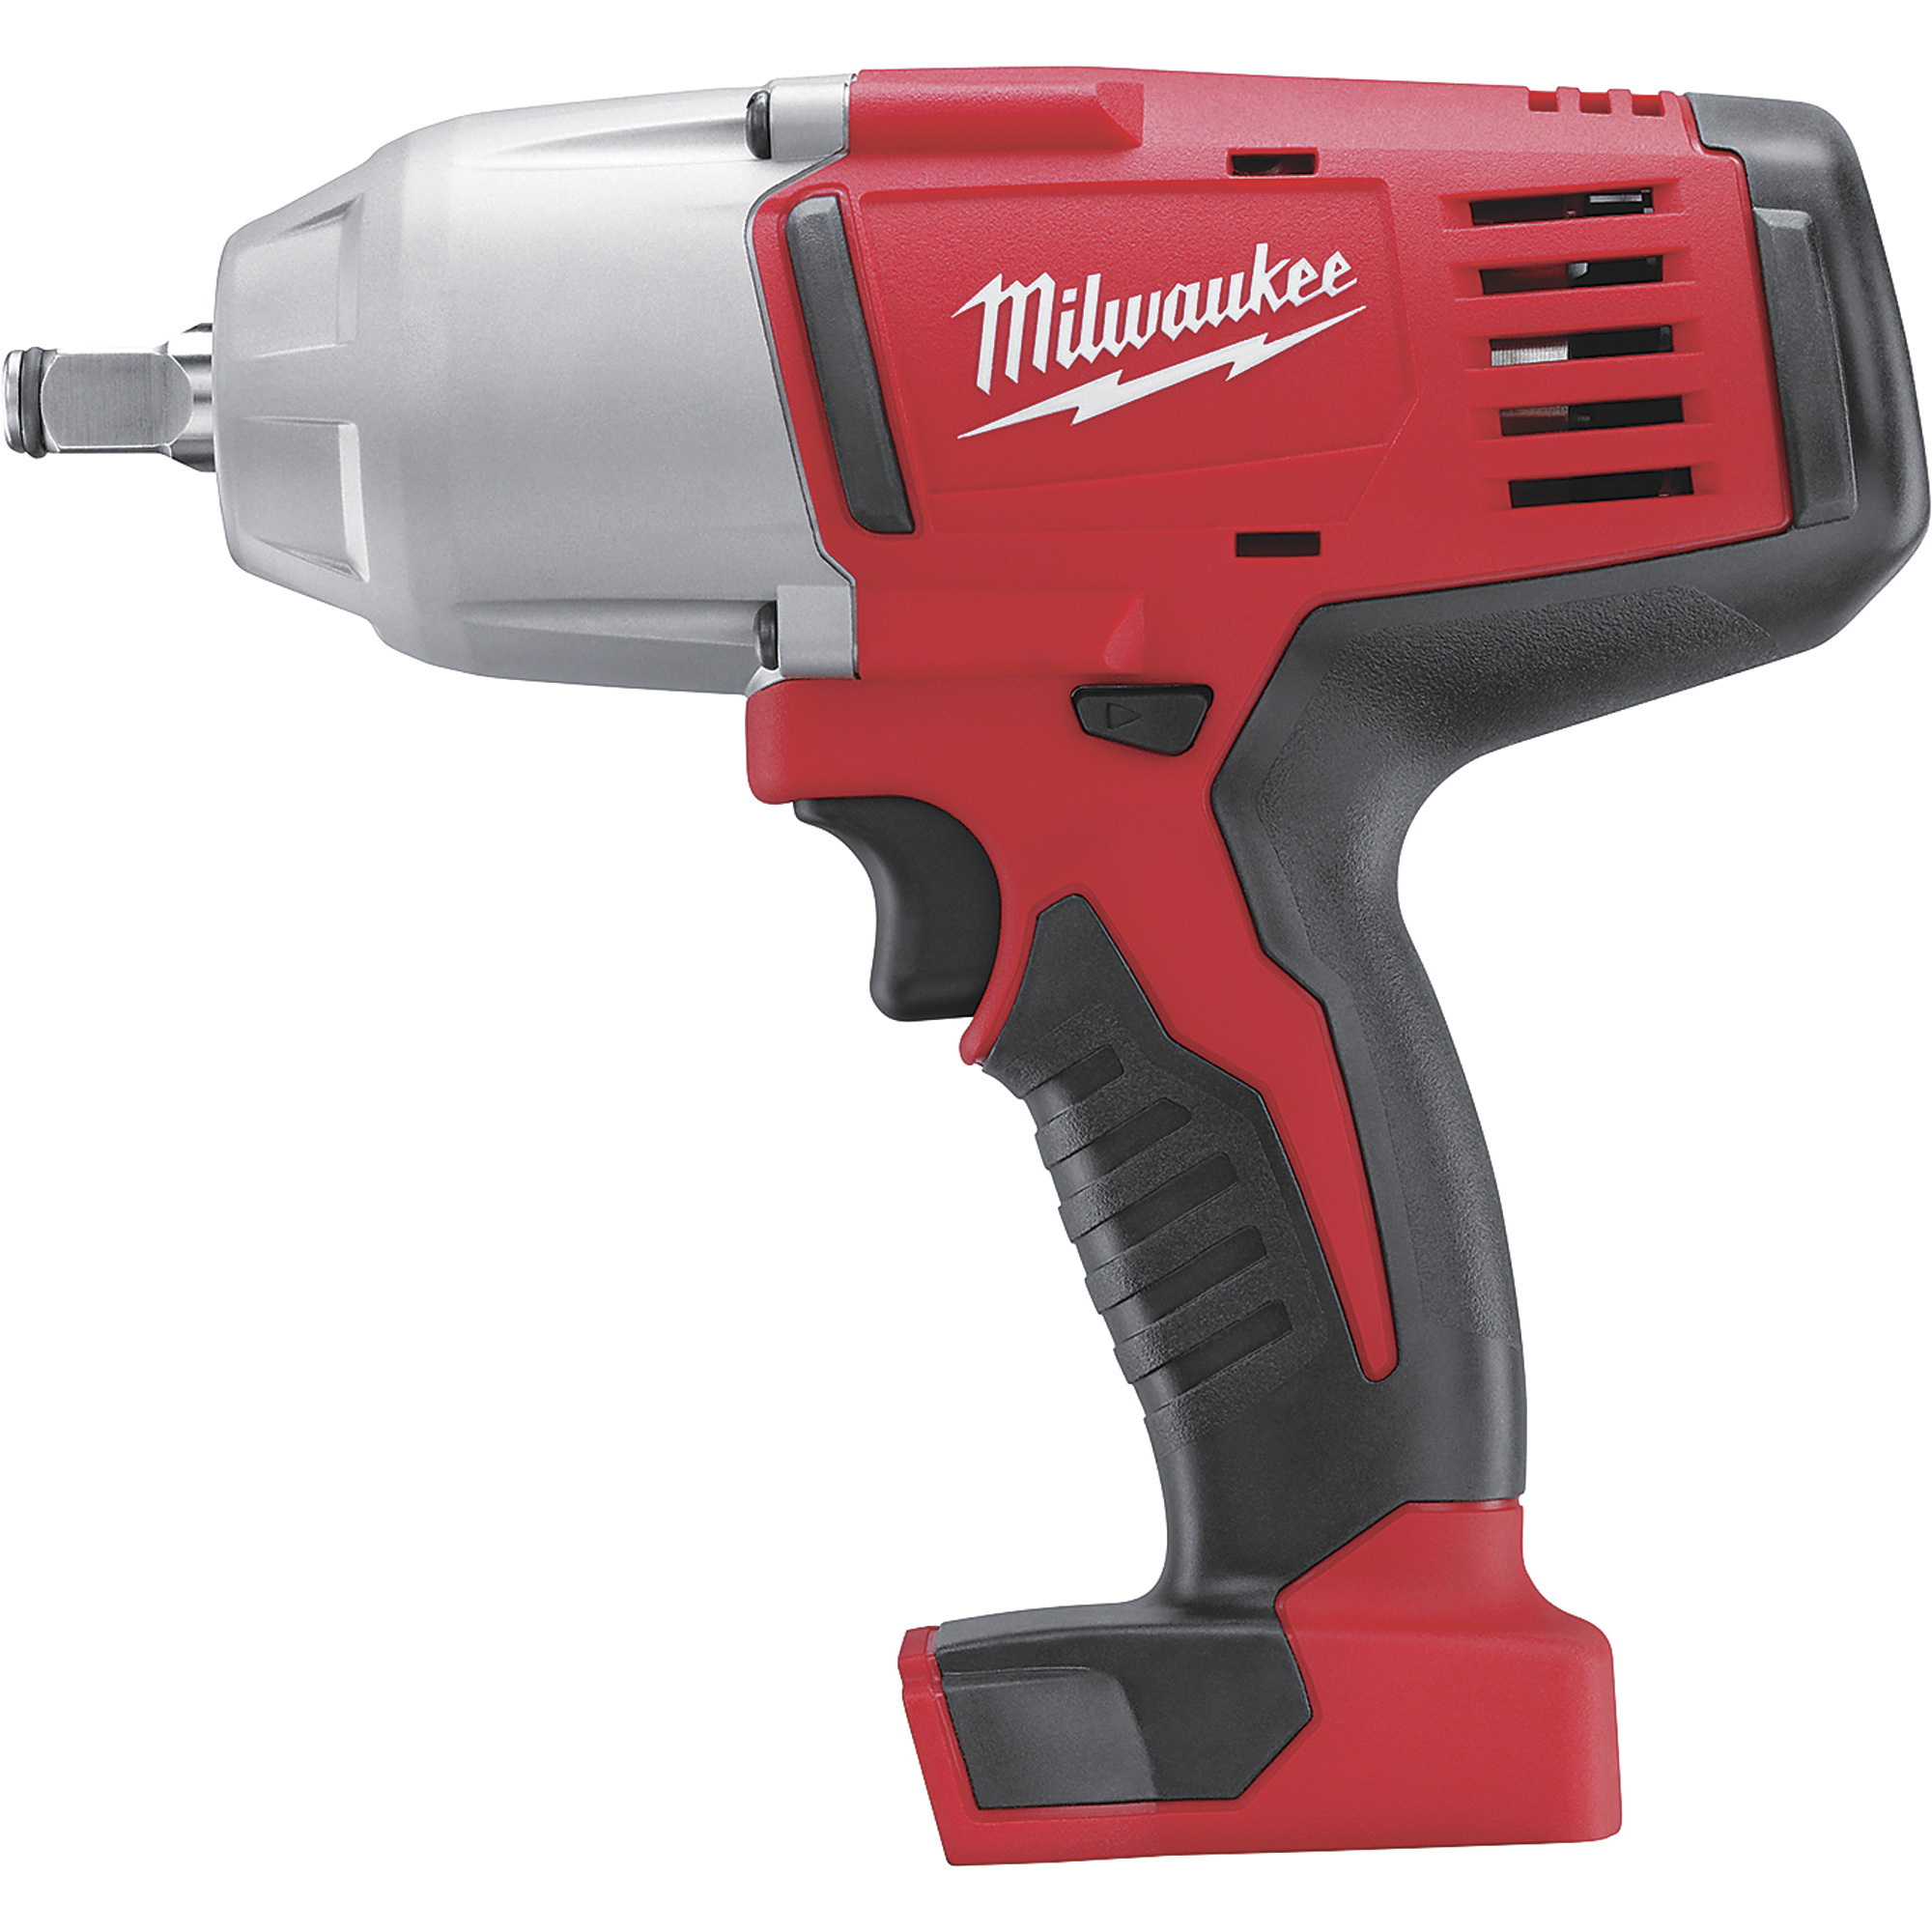 Milwaukee M18 Cordless Impact Wrench with Friction Ring, 1/2Inch Drive, 450 Ft.-Lbs. Torque, Tool Only, Model 2663-20